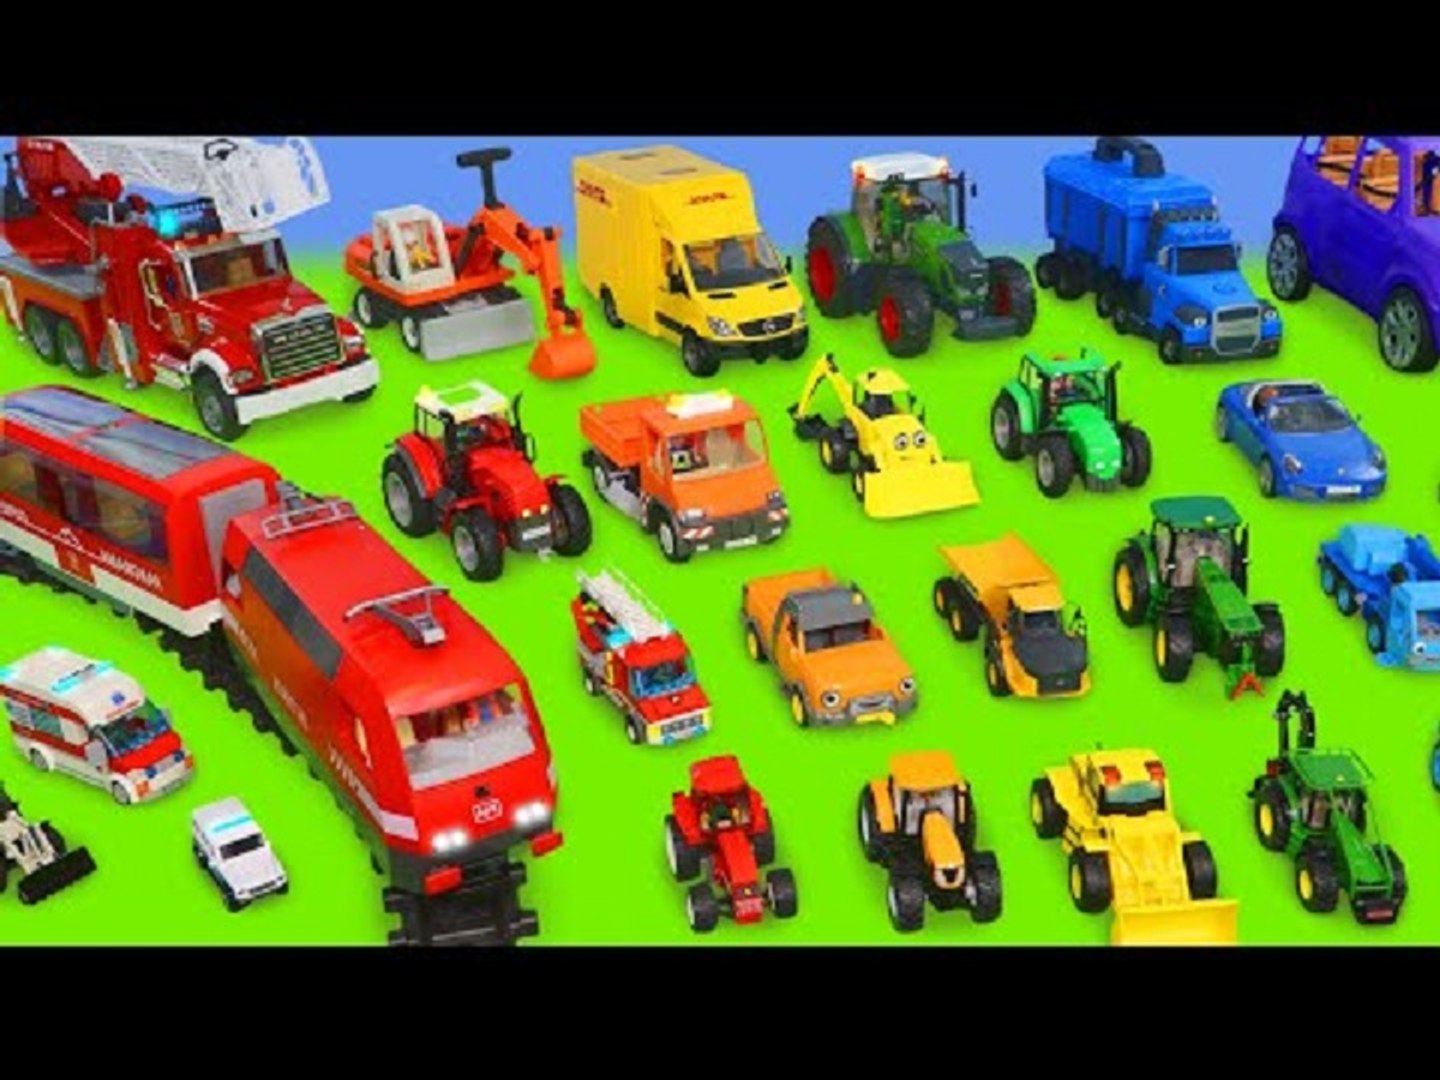 Concrete Mixer, Fire Truck, Tractor, Garbage Trucks, Cars & Trains - Toy  Vehicles for Kids - video Dailymotion